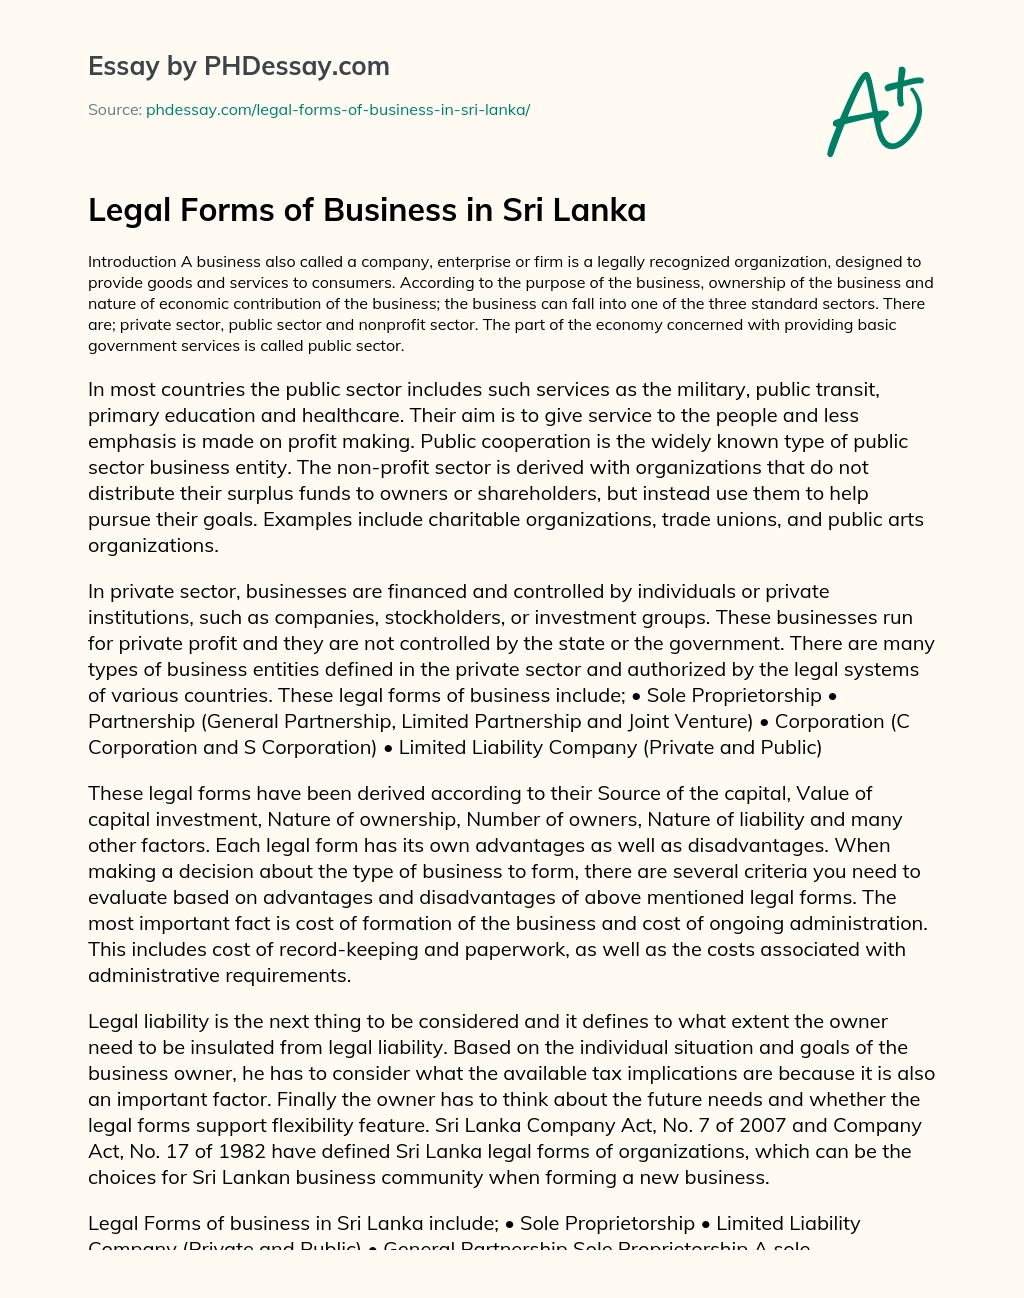 Legal Forms of Business in Sri Lanka essay